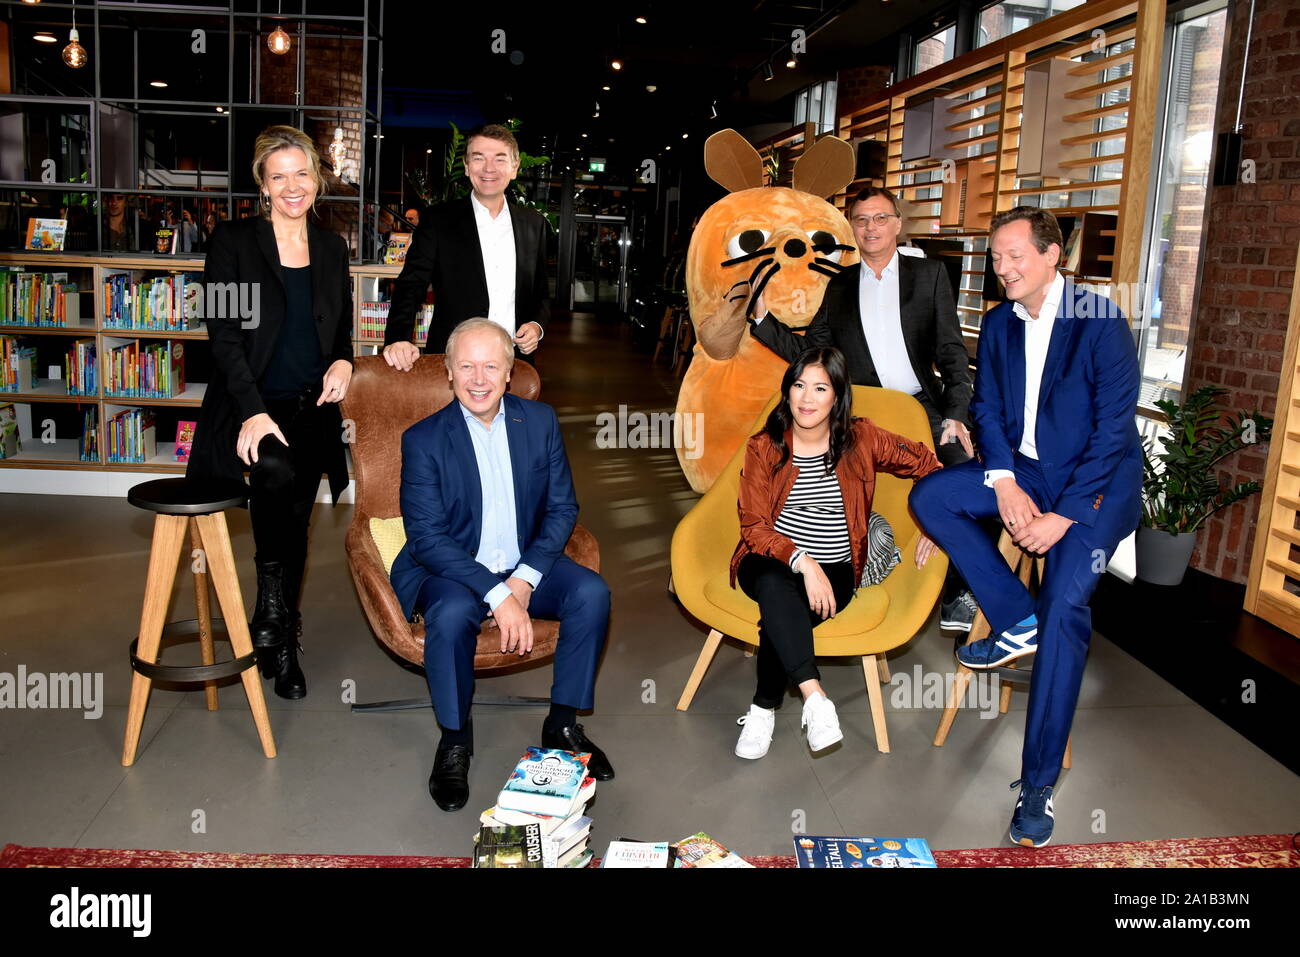 Cologne, Germany. 25th Sep, 2019. Valerie Weber, l-r, Tom Buhrow, Jörg Schönenborn, Maus, Mai Thi Nguyen-Kim, Volker Herres and Eckart von Hirschhausen pose at the press conference for the ARD Theme Week 2019, which deals with 'Future Education' from 9 to 16 November. Credit: Horst Galuschka/dpa/Alamy Live News Stock Photo